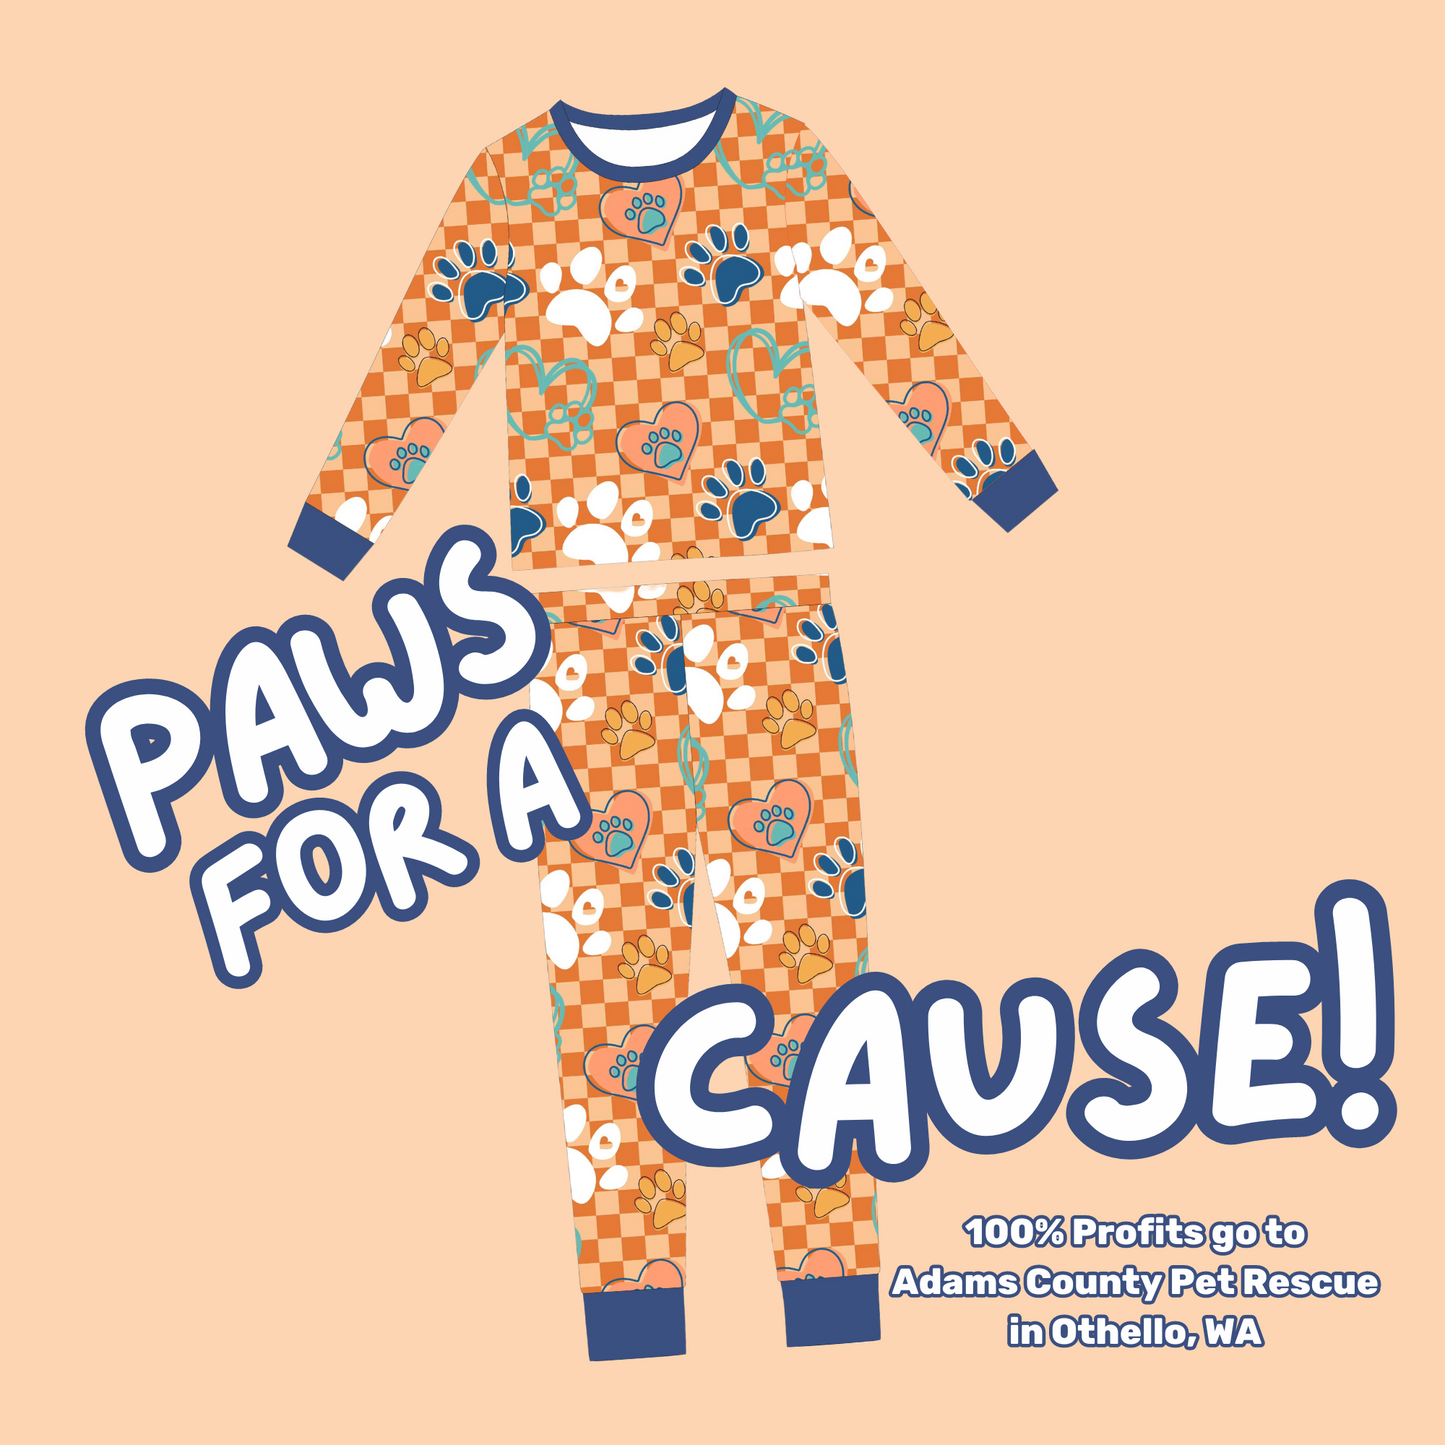 PRE ORDER: PAWS FOR A CAUSE Two Piece Bamboo Pajamas